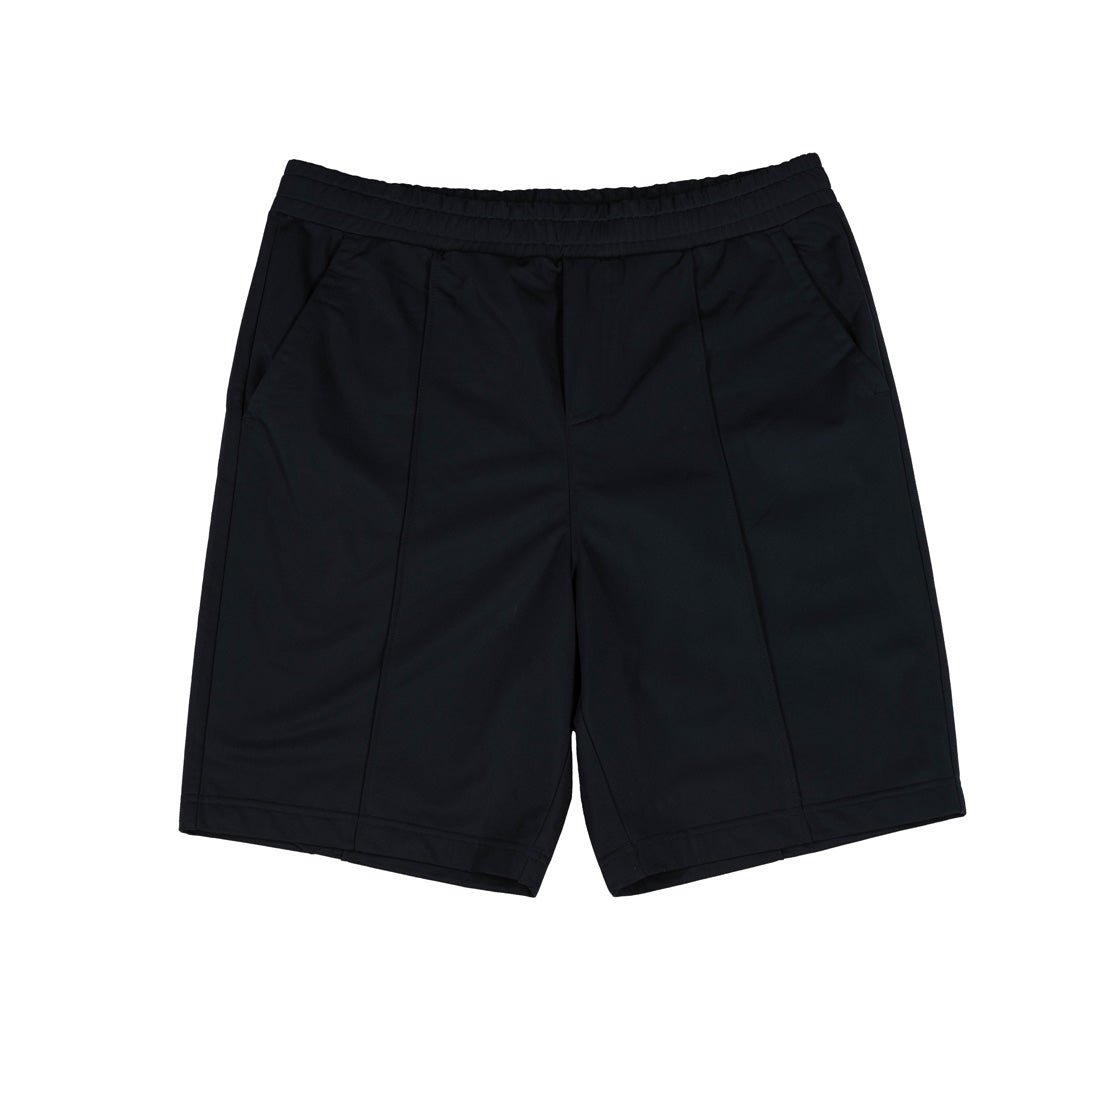 H&M Brand New Shorts For Men - mymadstore.com